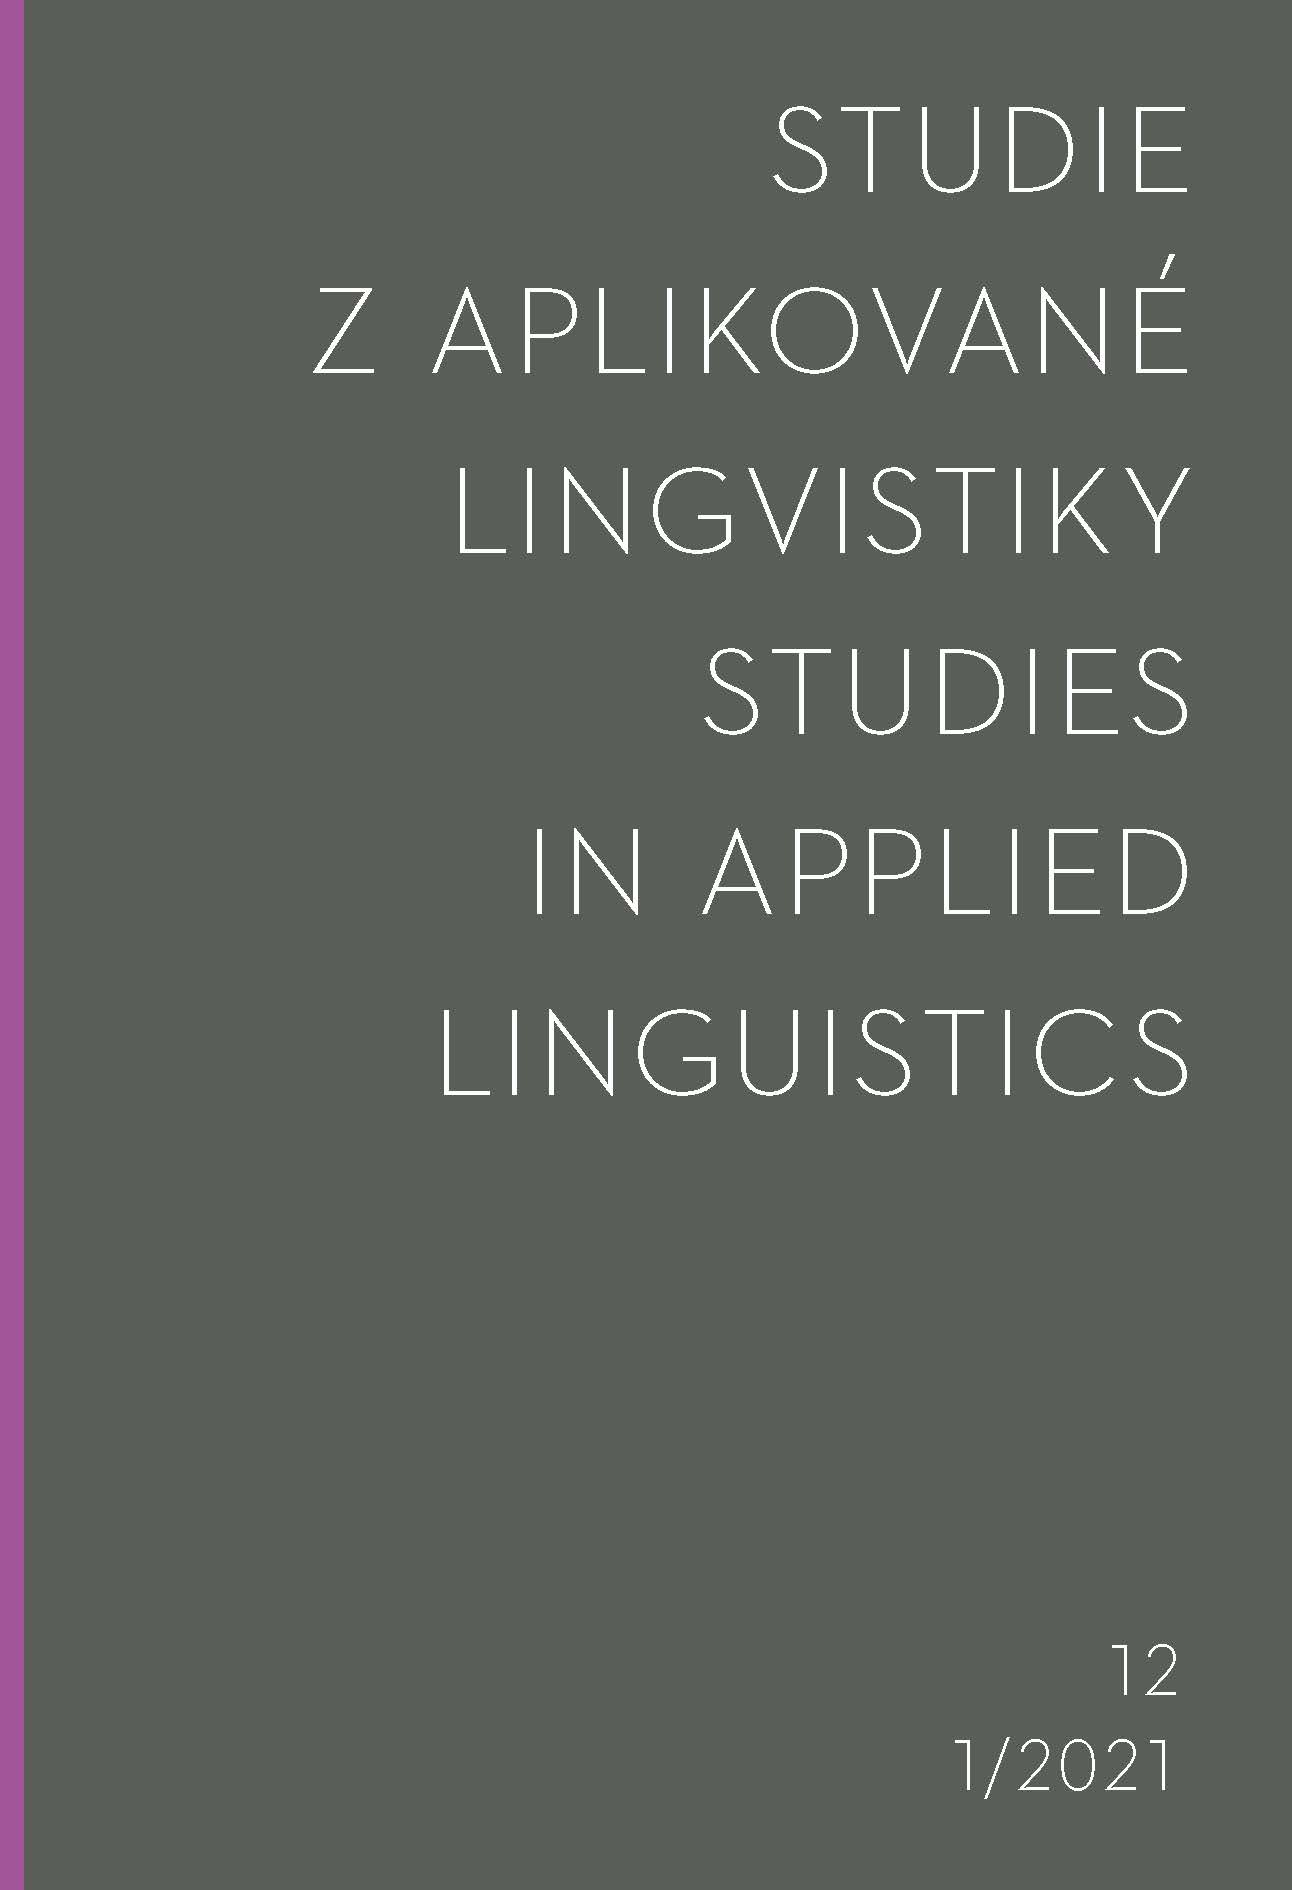 Plain Language in the Czech Republic, the UK, and the US